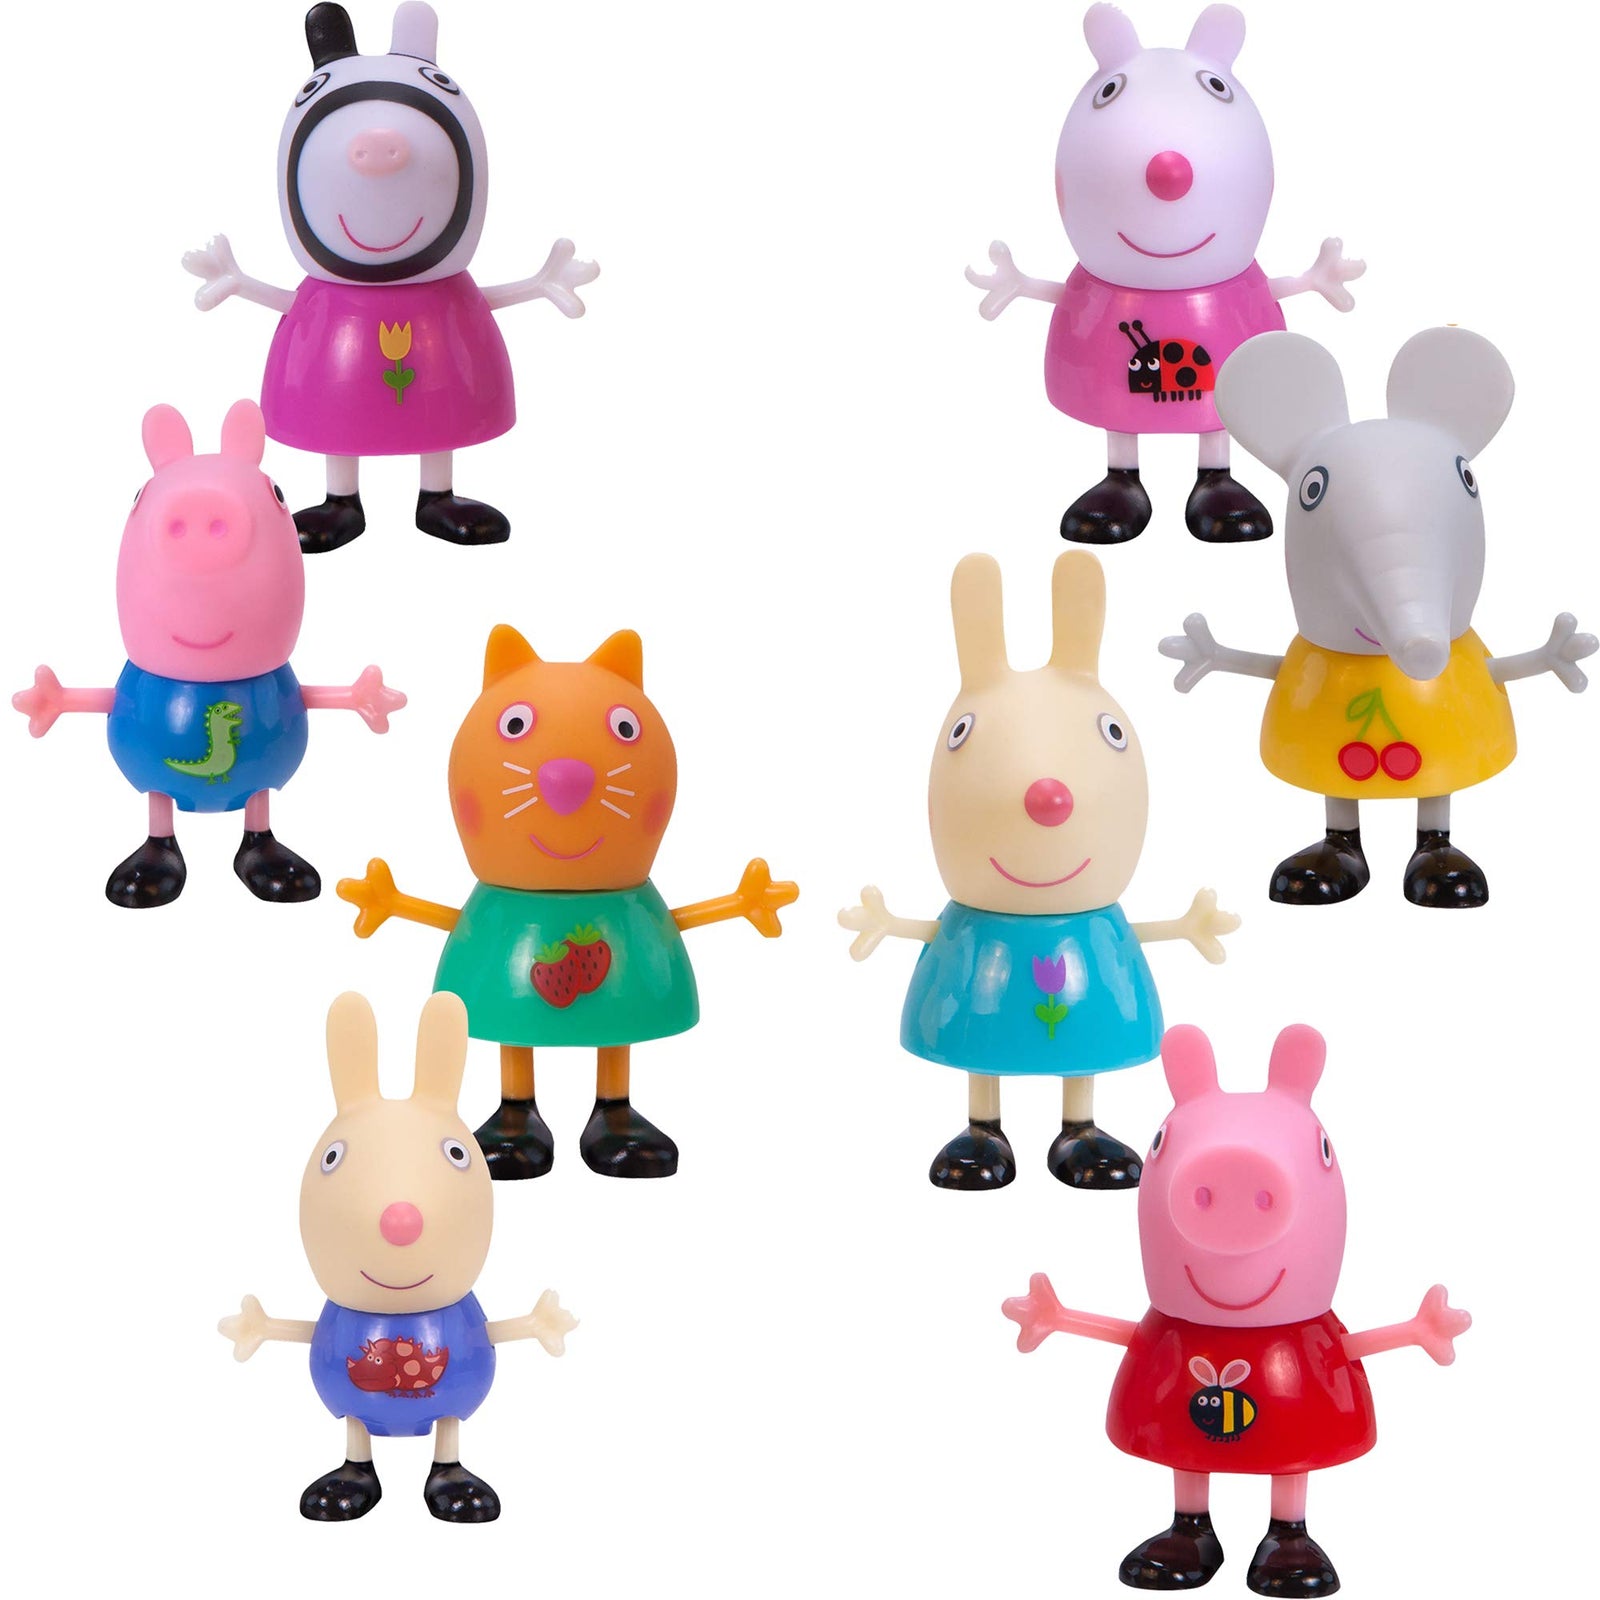 Peppa Pig Forever Friends Figure Pack, Set of 8 - Includes Character Figures of Peppa, George Pig, Suzy Sheep, Zoe Zabra and More - Toy Gift for Kids - Ages 2+